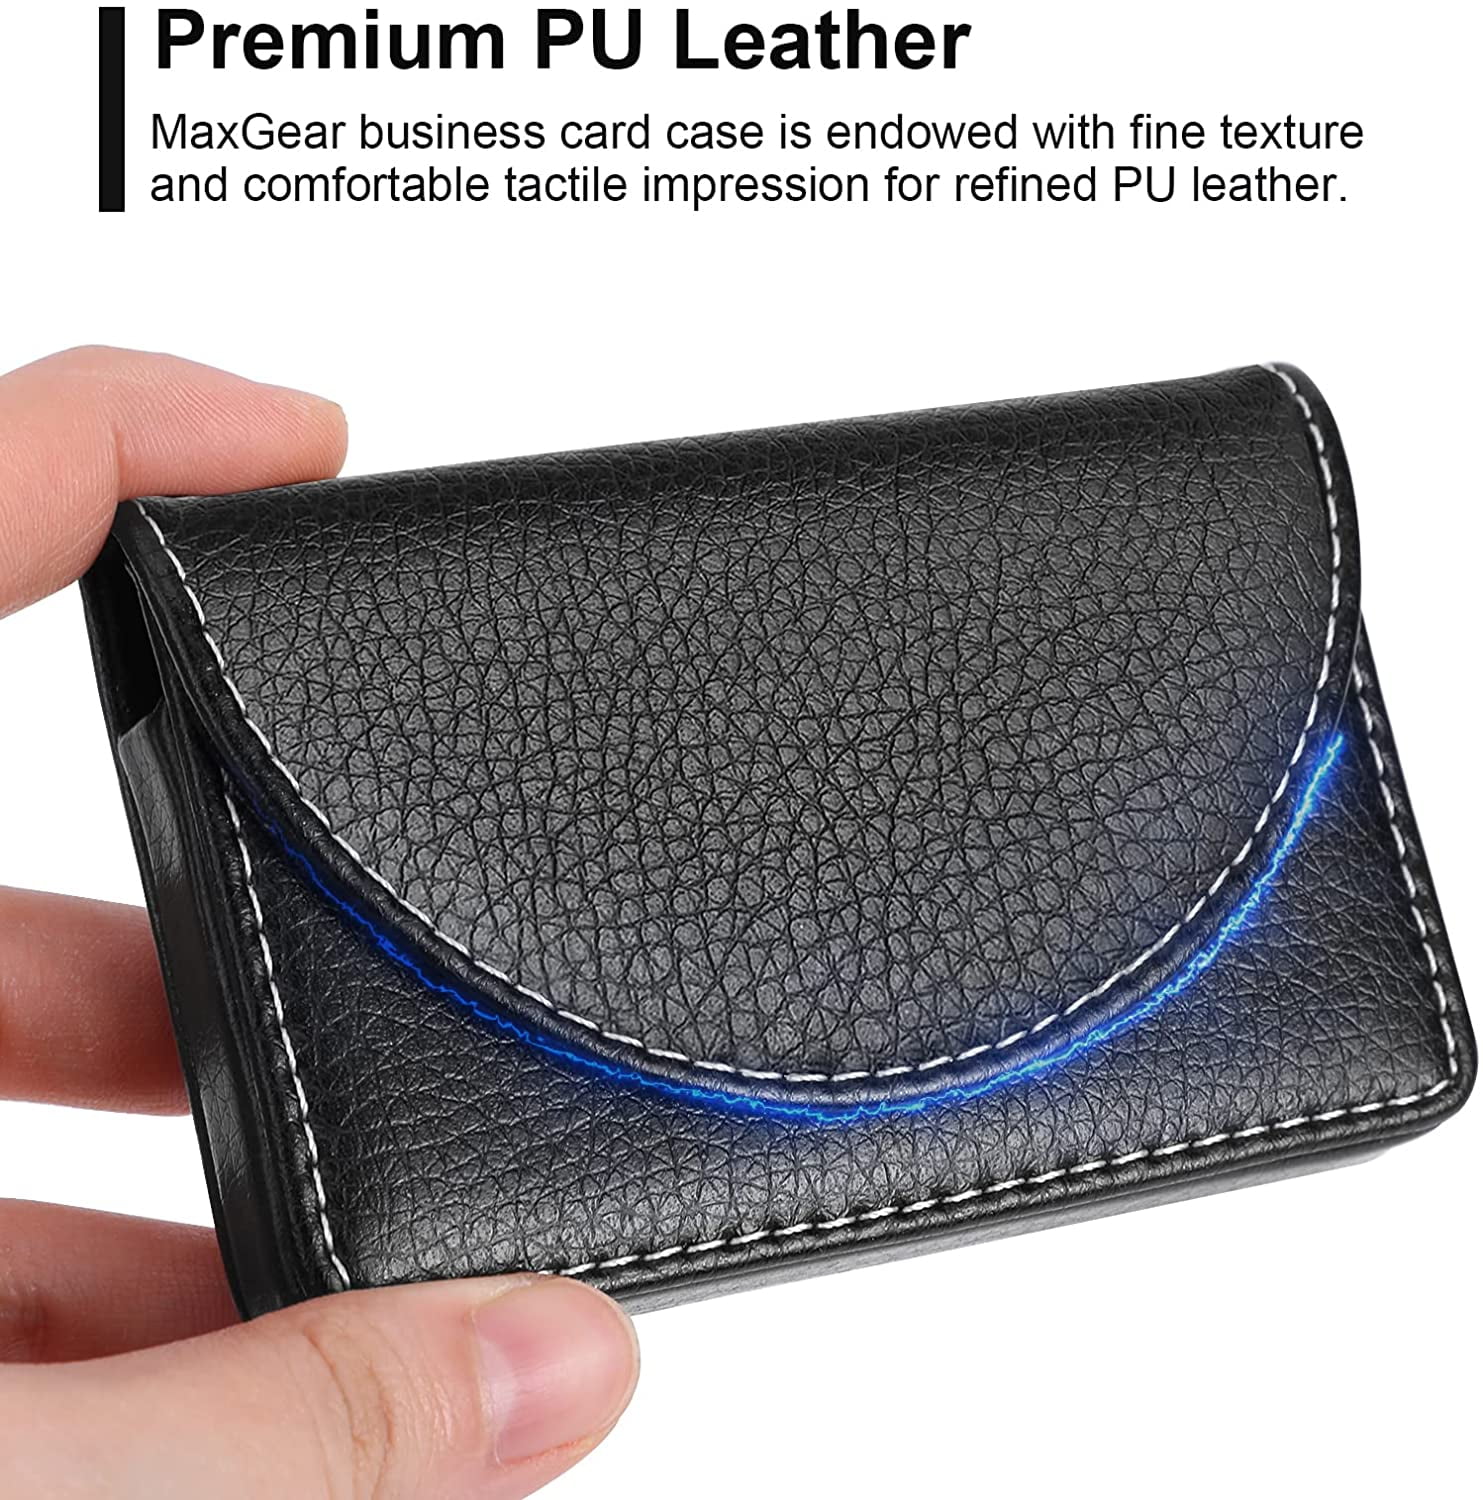 Storite PU Leather Pocket Size Stainless Steel Multi Business Visiting Wallet Debit Credit Card Holders for Men & Women (9.5 X 1.3 x 6.5 cm)